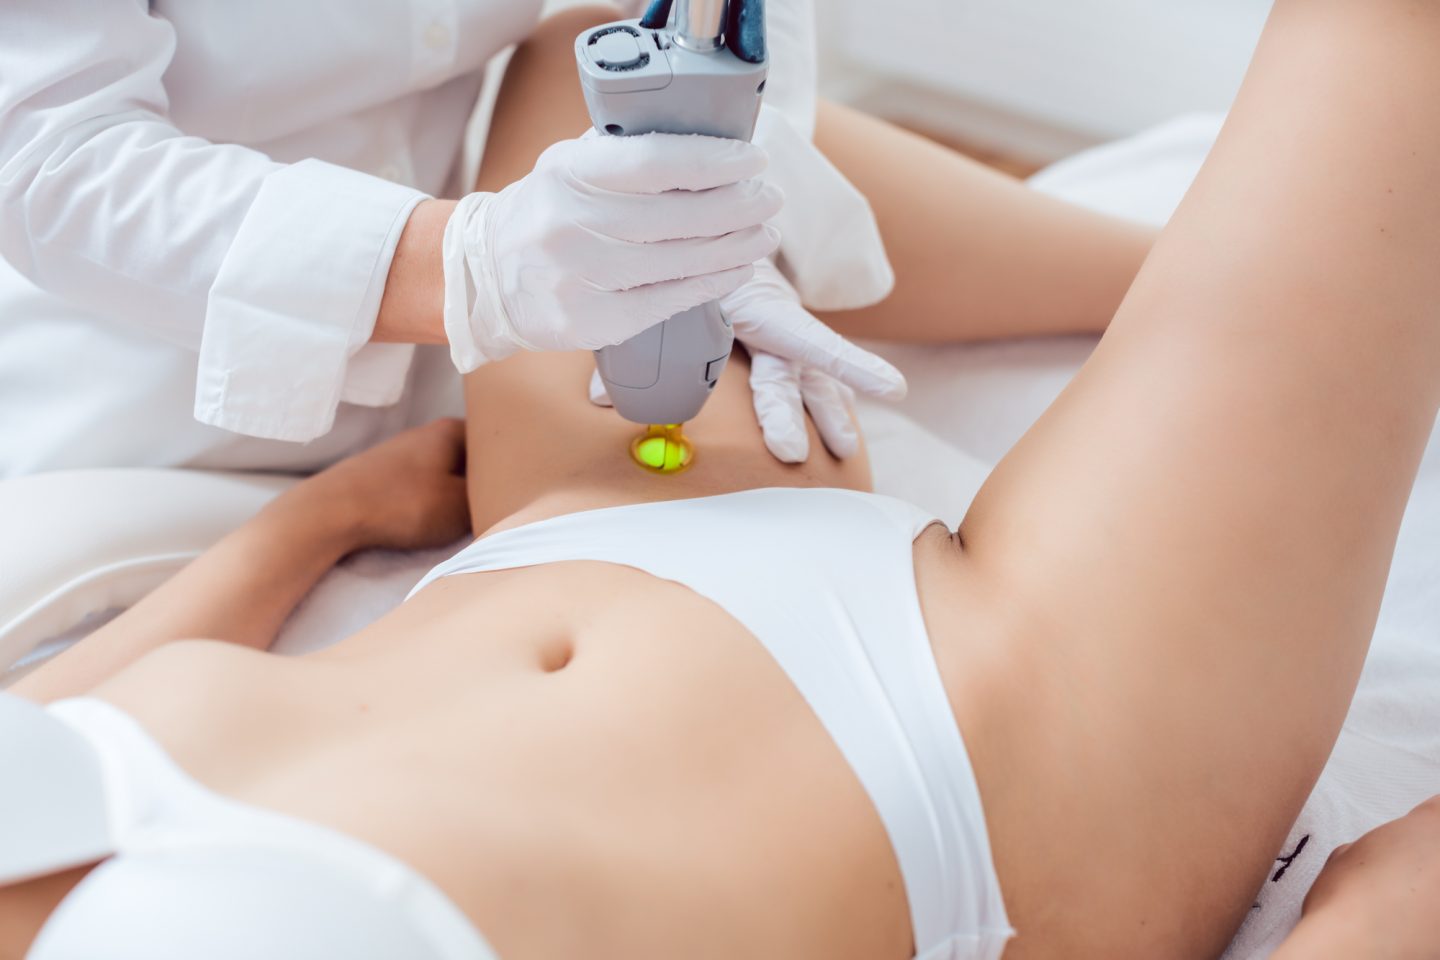 Can You Get Laser Hair Removal While On Your Period?